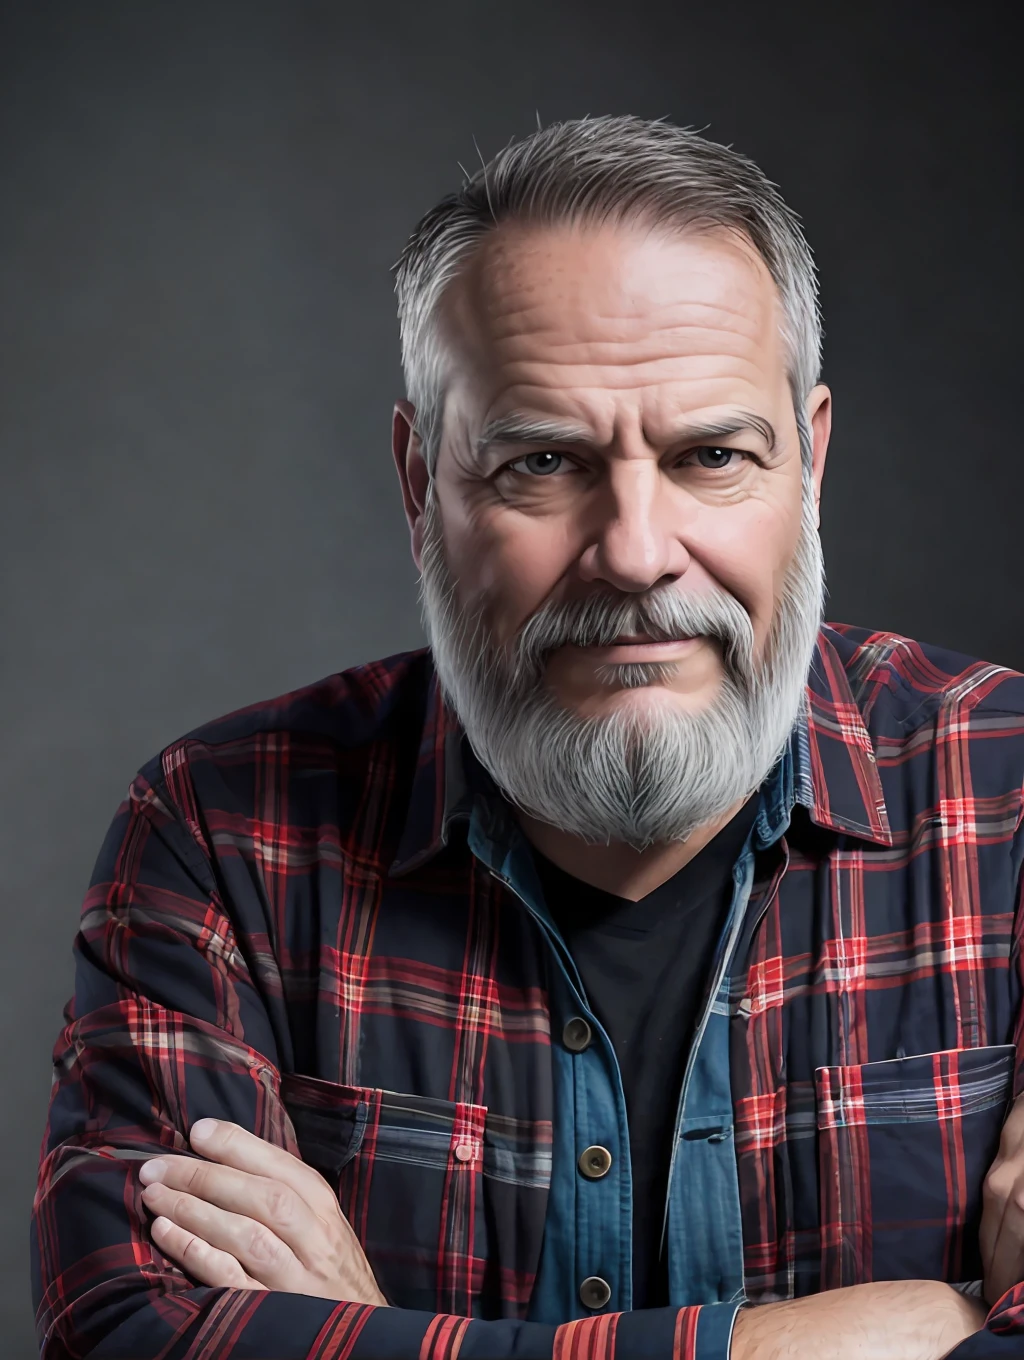 Portrait of a middle-aged man, face skin detalados, wrinkles of expressionbeard gray lumberjack style, raw leather jacket, plaid shirt, stiff countenance. Ultra detailed scene, dslr camera with 50mm Lens, soft studio lighting